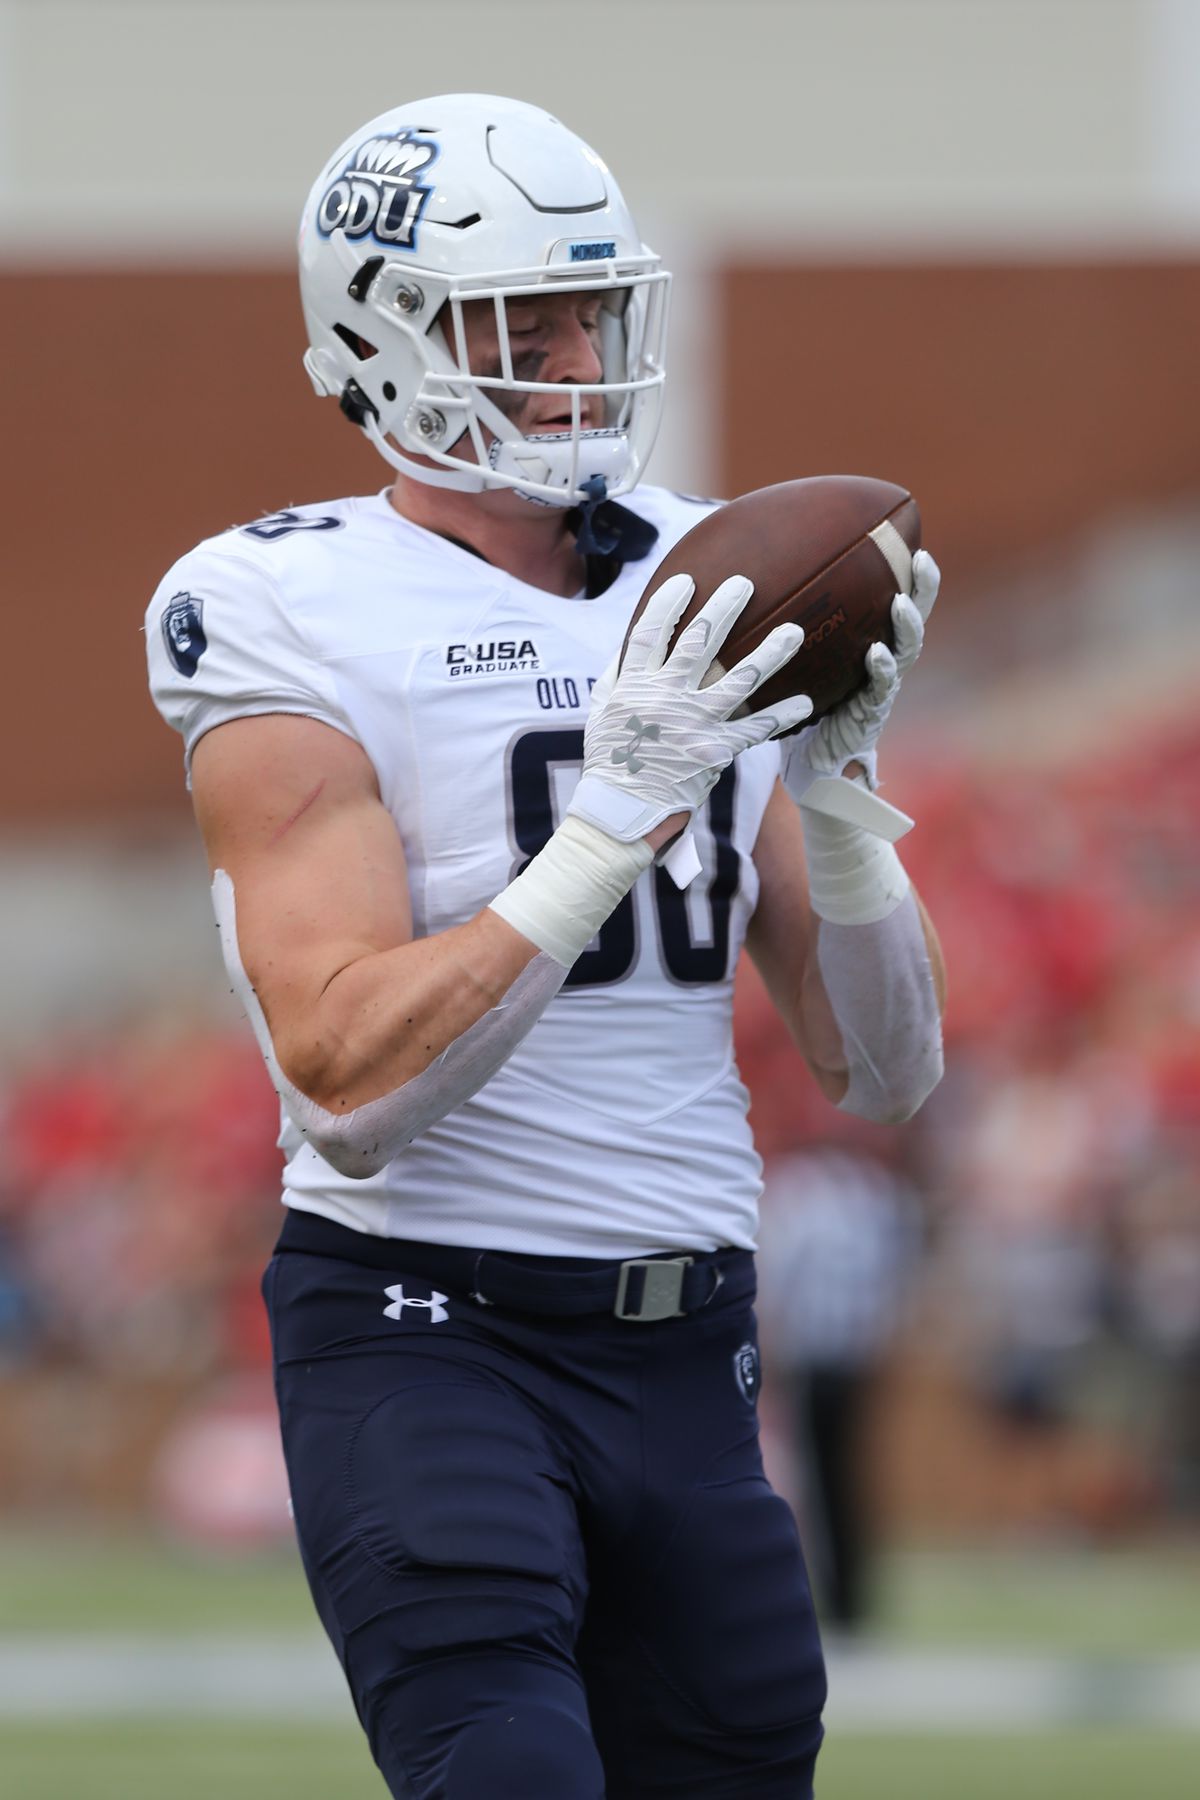 COLLEGE FOOTBALL: SEP 18 Old Dominion at Liberty